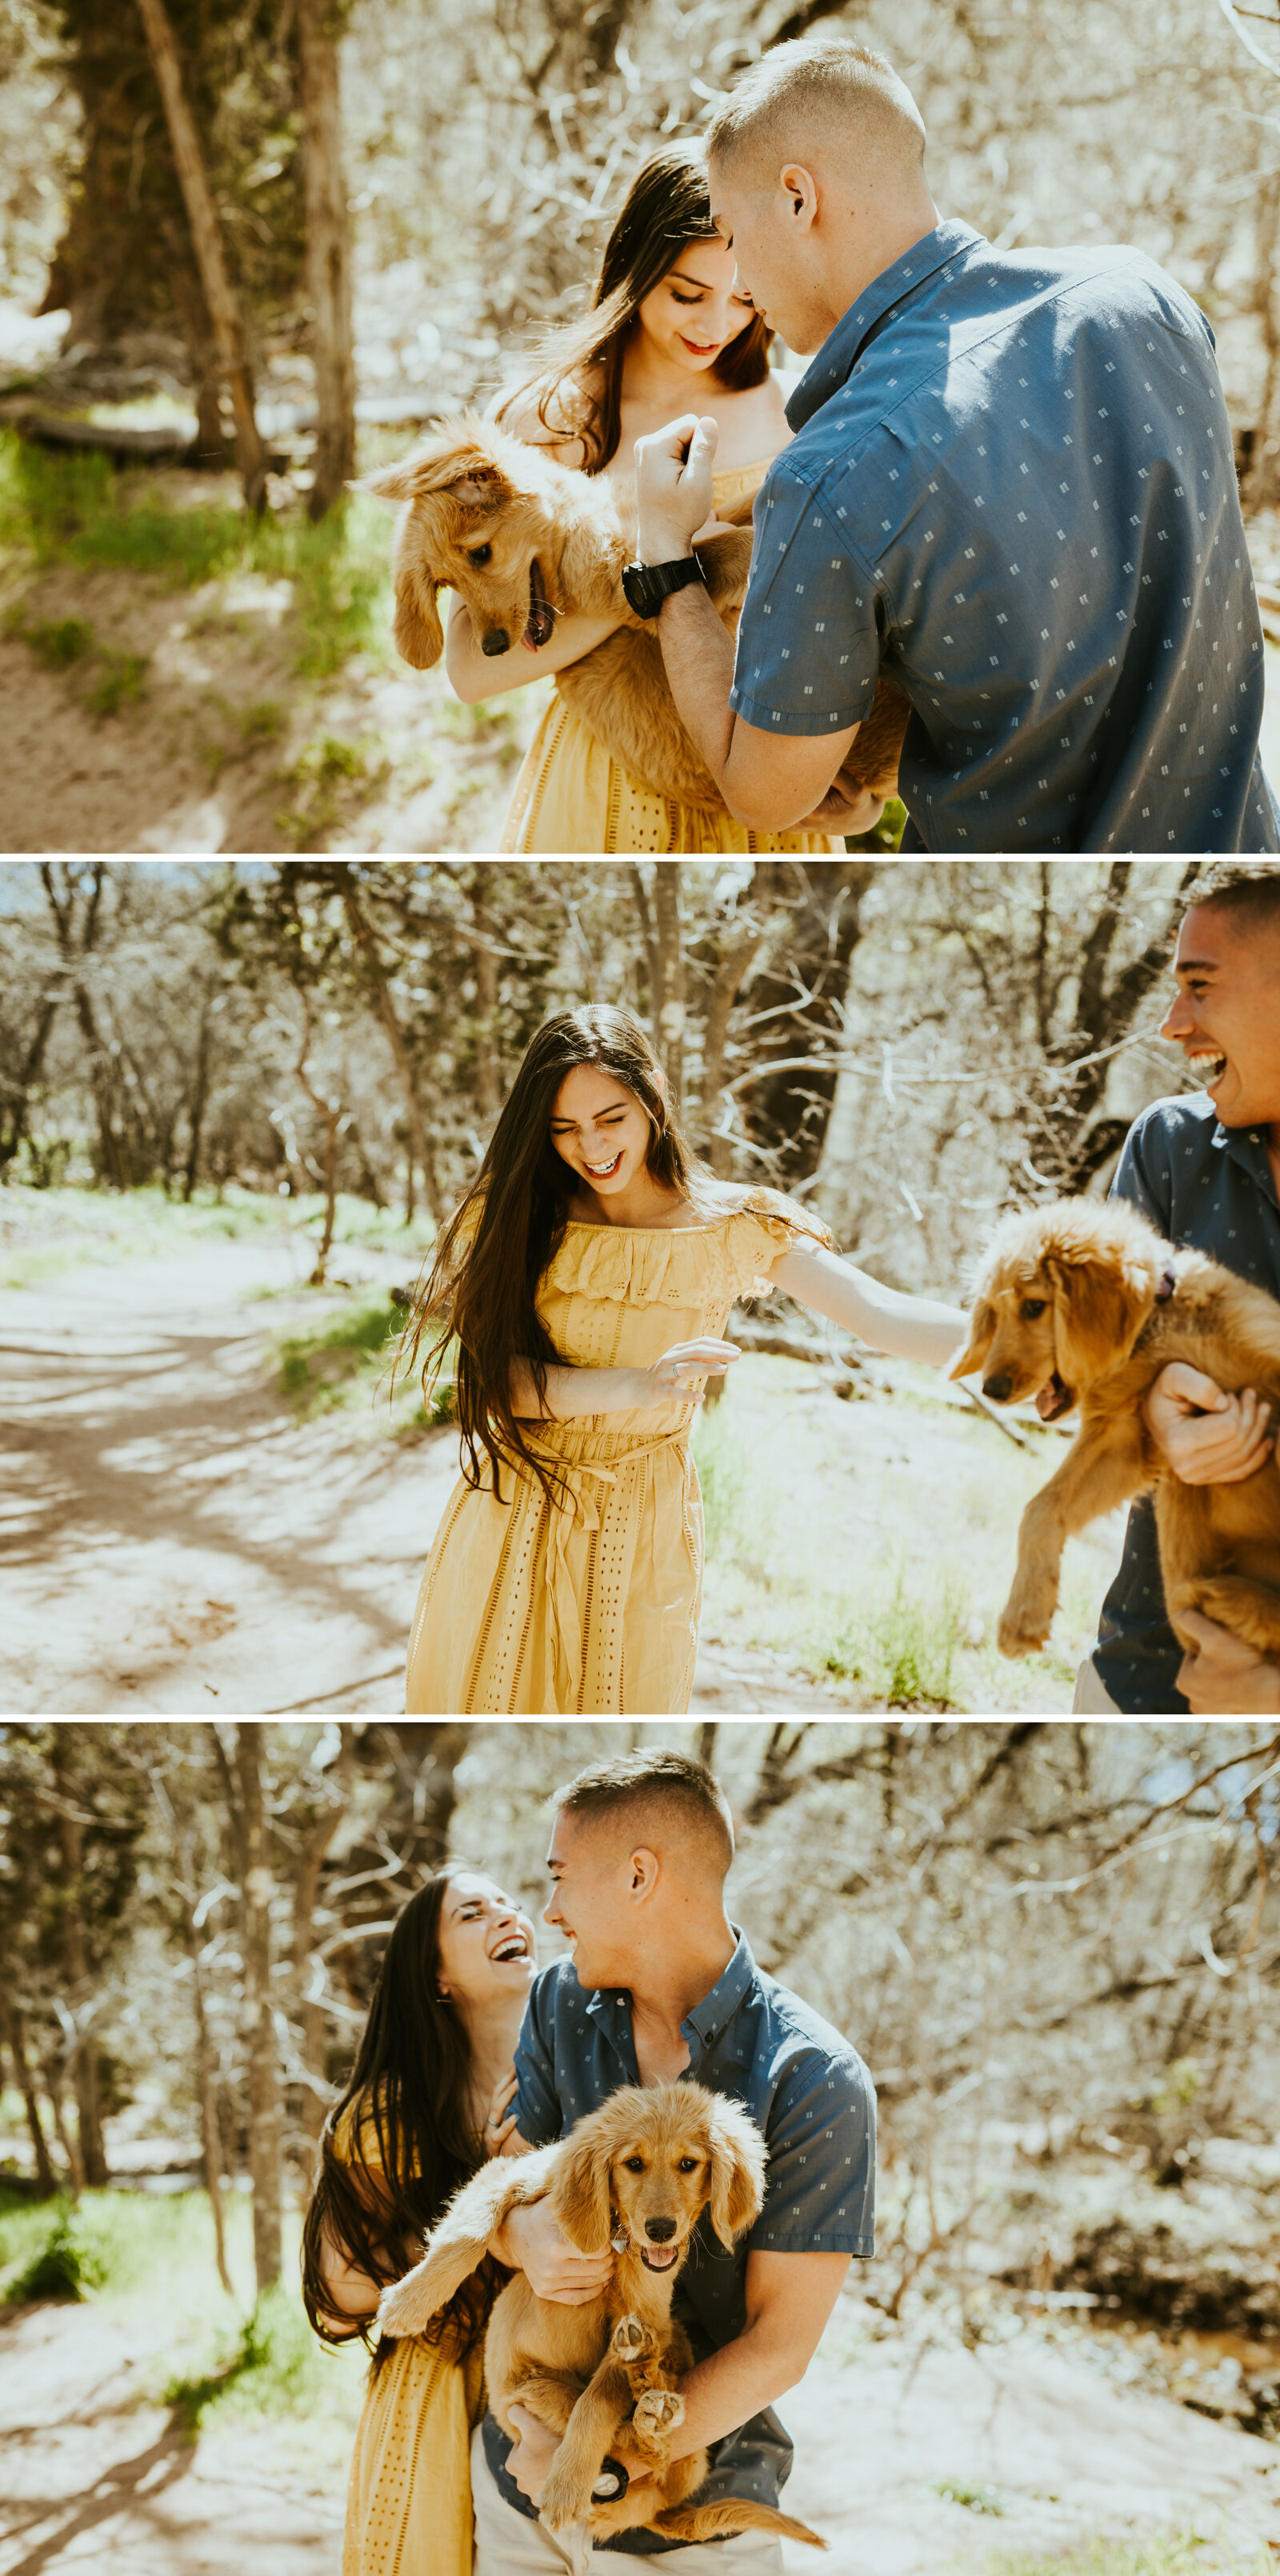 red rock crossing sedona arizona cathedral rock crescent moon ranch couple photos engagement photo outfit inspiration couple posing ideas midday photos anniversary photos puppy dog goldendoodle puppy couple photos .jpg